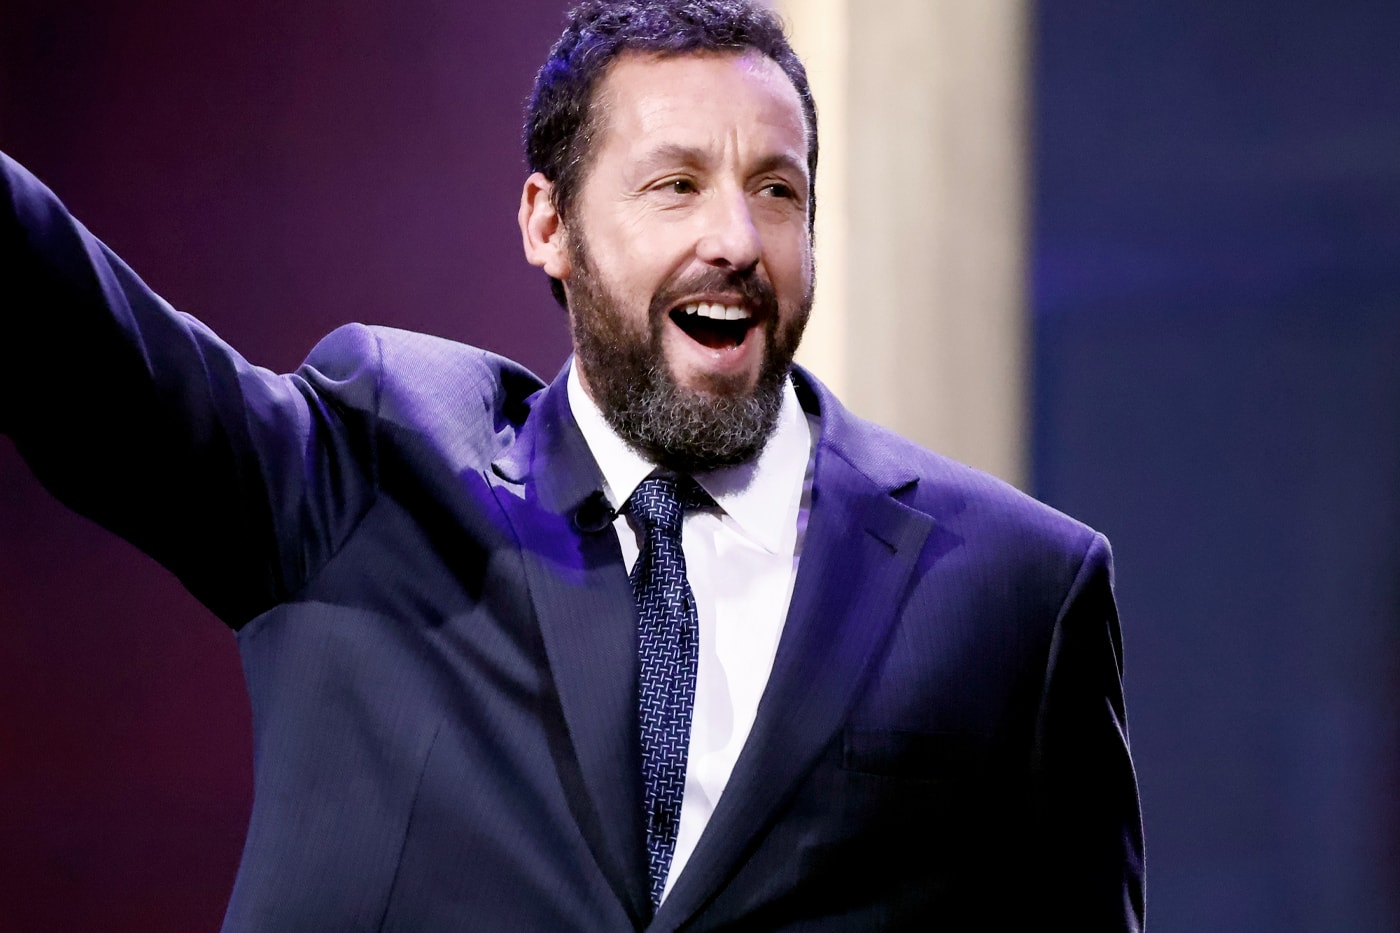 Adam Sandler Sets New Netflix Comedy Special directed by josh safdie stand up comedy uncut gems benny safdie untitled 100% fresh comedian rom com basketball